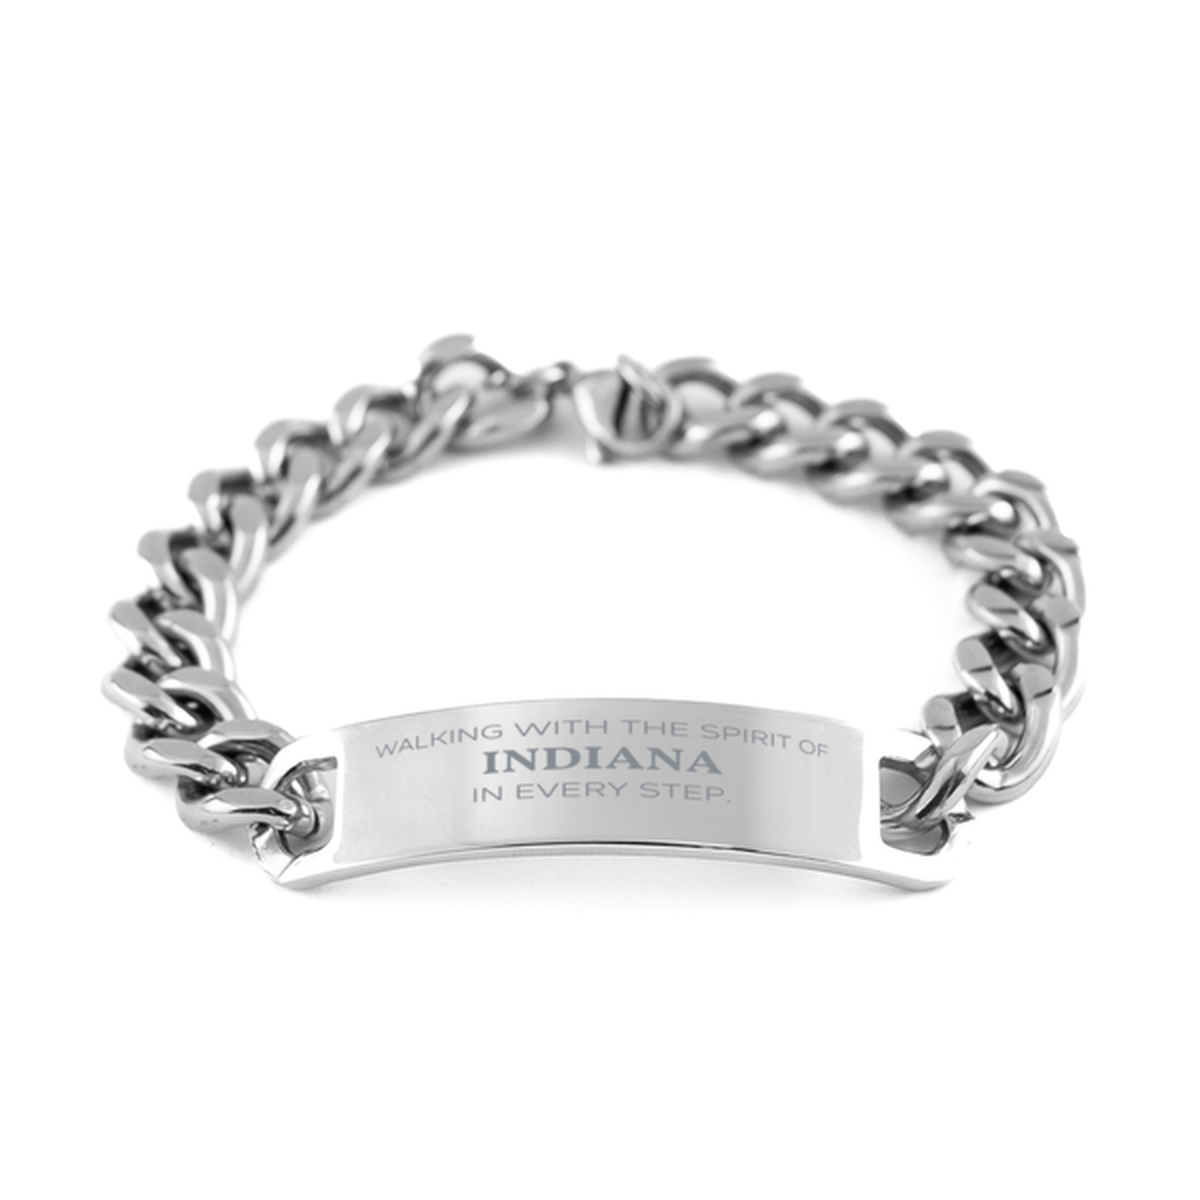 Indiana Gifts, Walking with the spirit, Love Indiana Birthday Christmas Cuban Chain Stainless Steel Bracelet For Indiana People, Men, Women, Friends